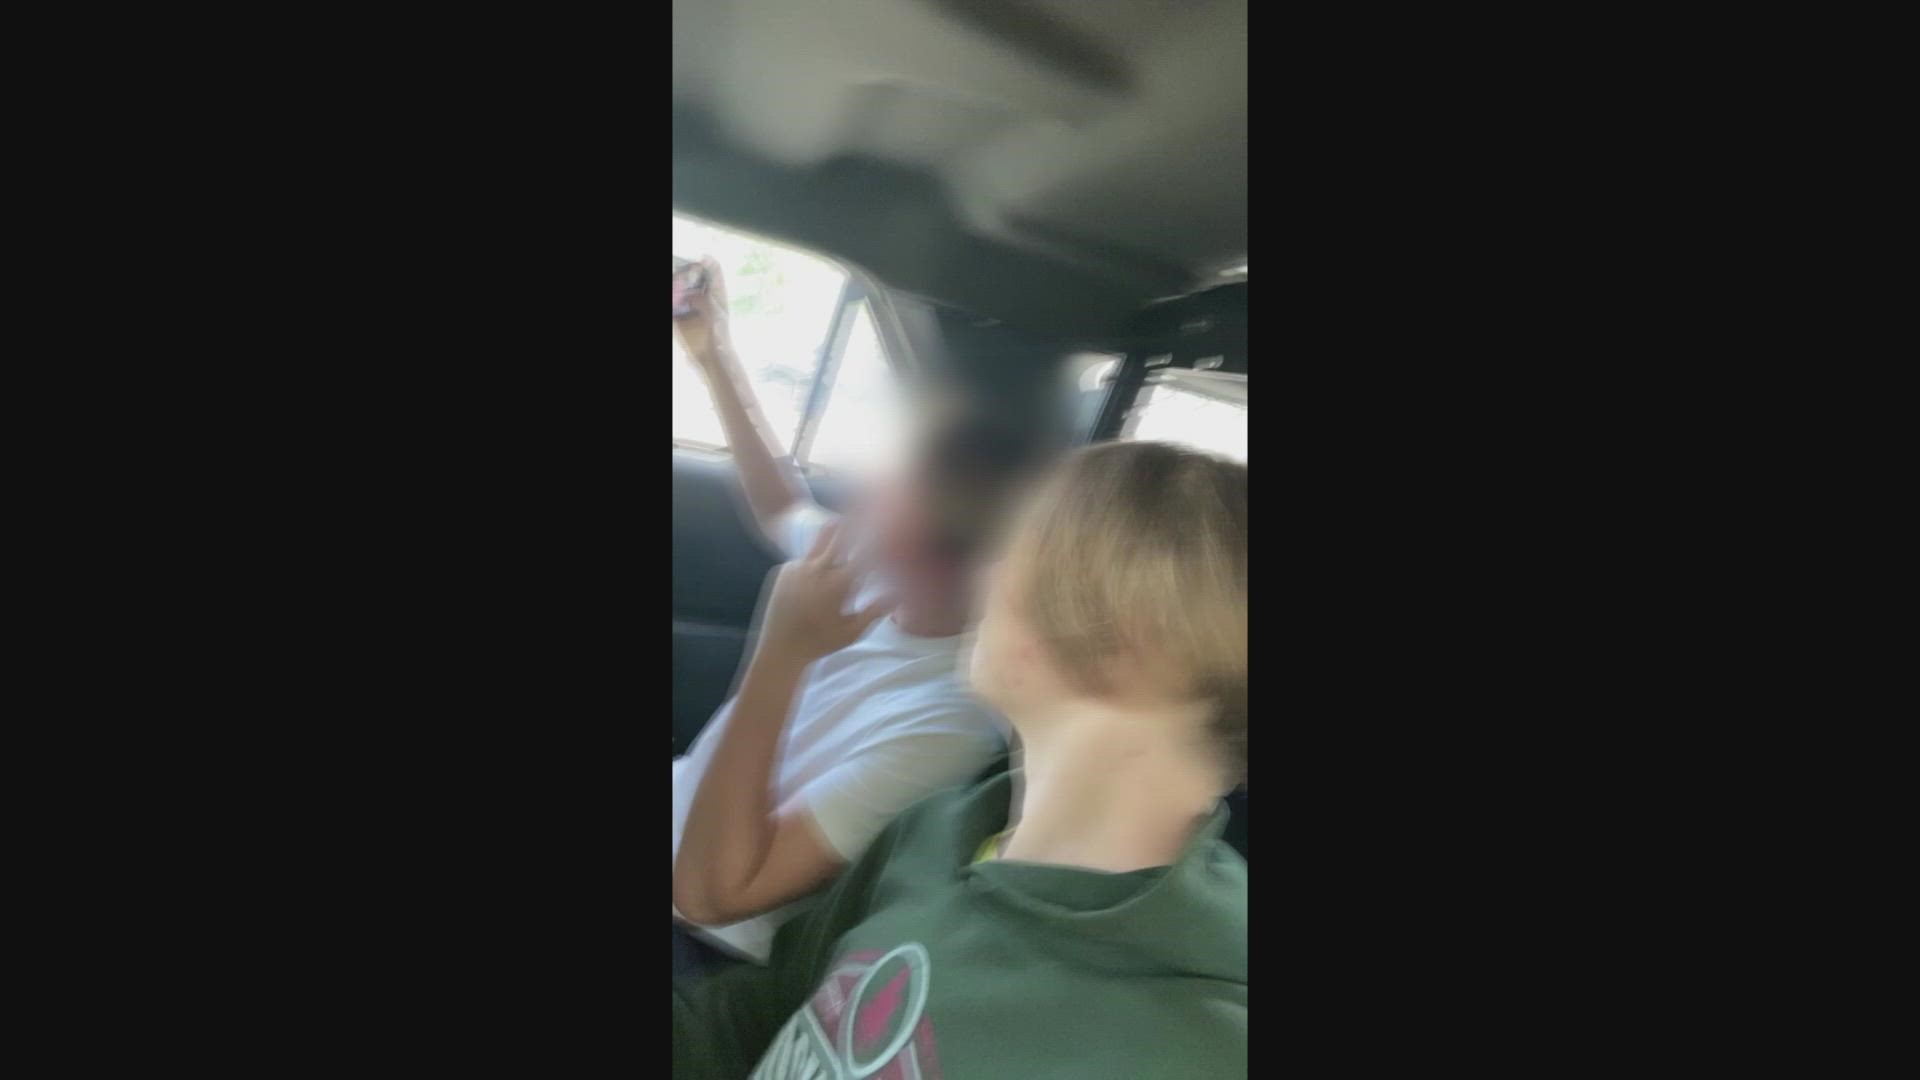 Video appearing to be from Aiden Fucci's social media shows him in the back of a police car after investigators say he killed Tristyn Bailey.